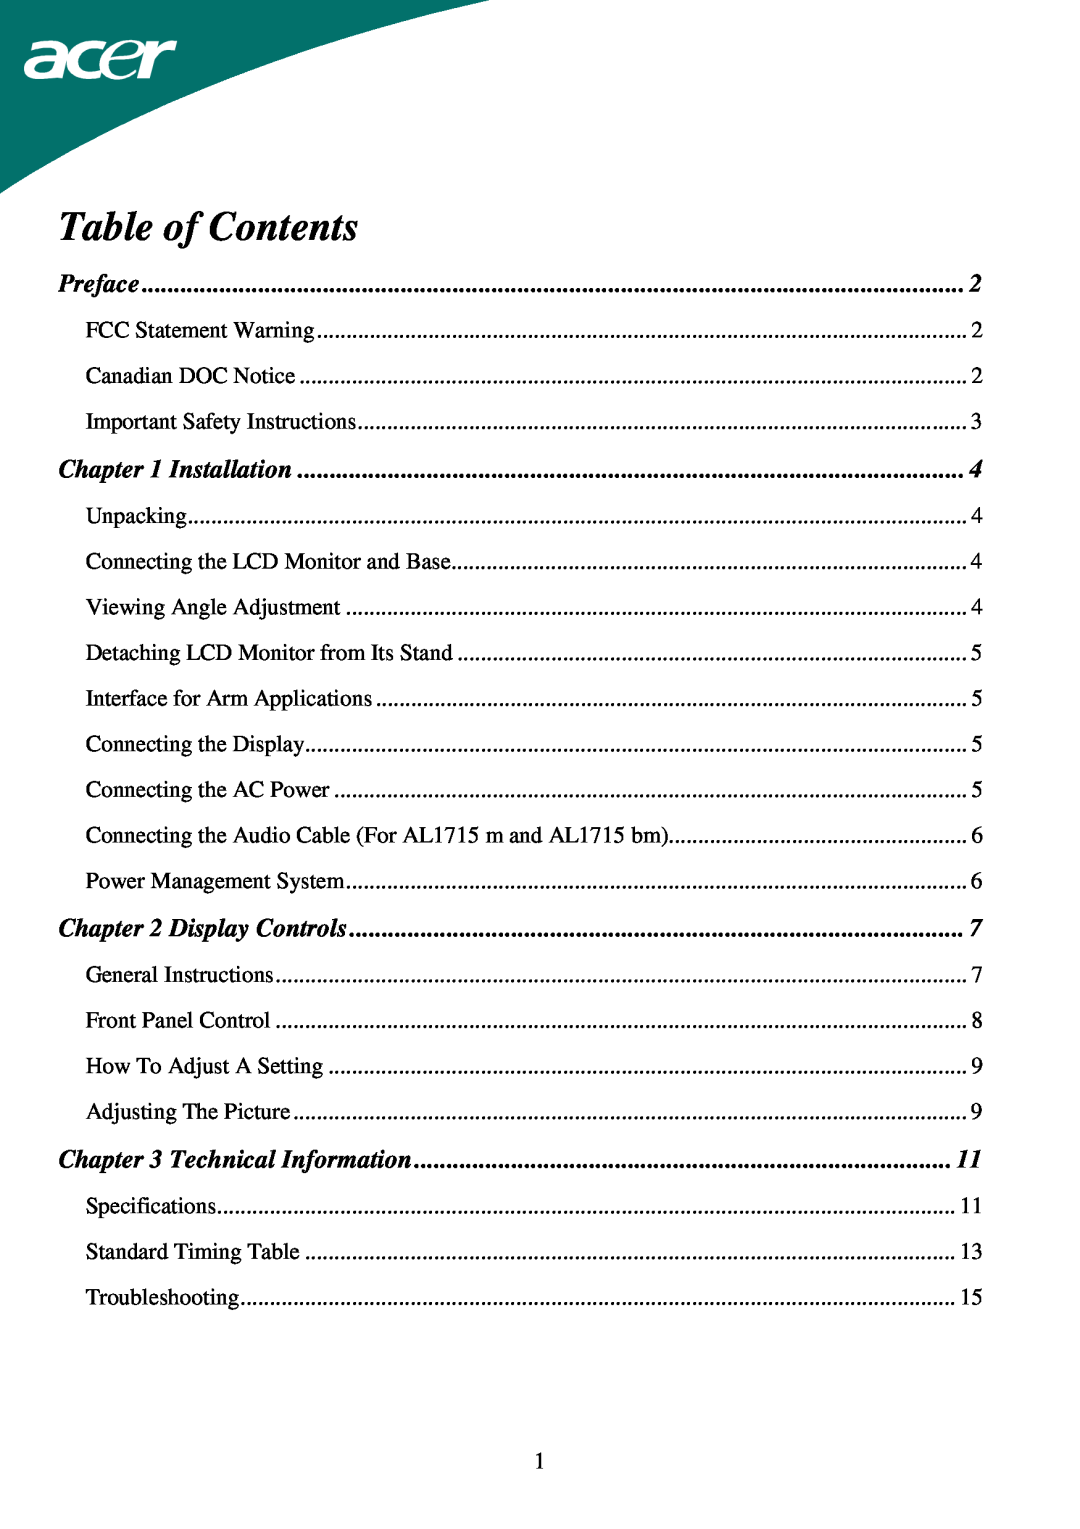 Acer AL1715 important safety instructions Table of Contents, Preface, Installation, Display Controls 